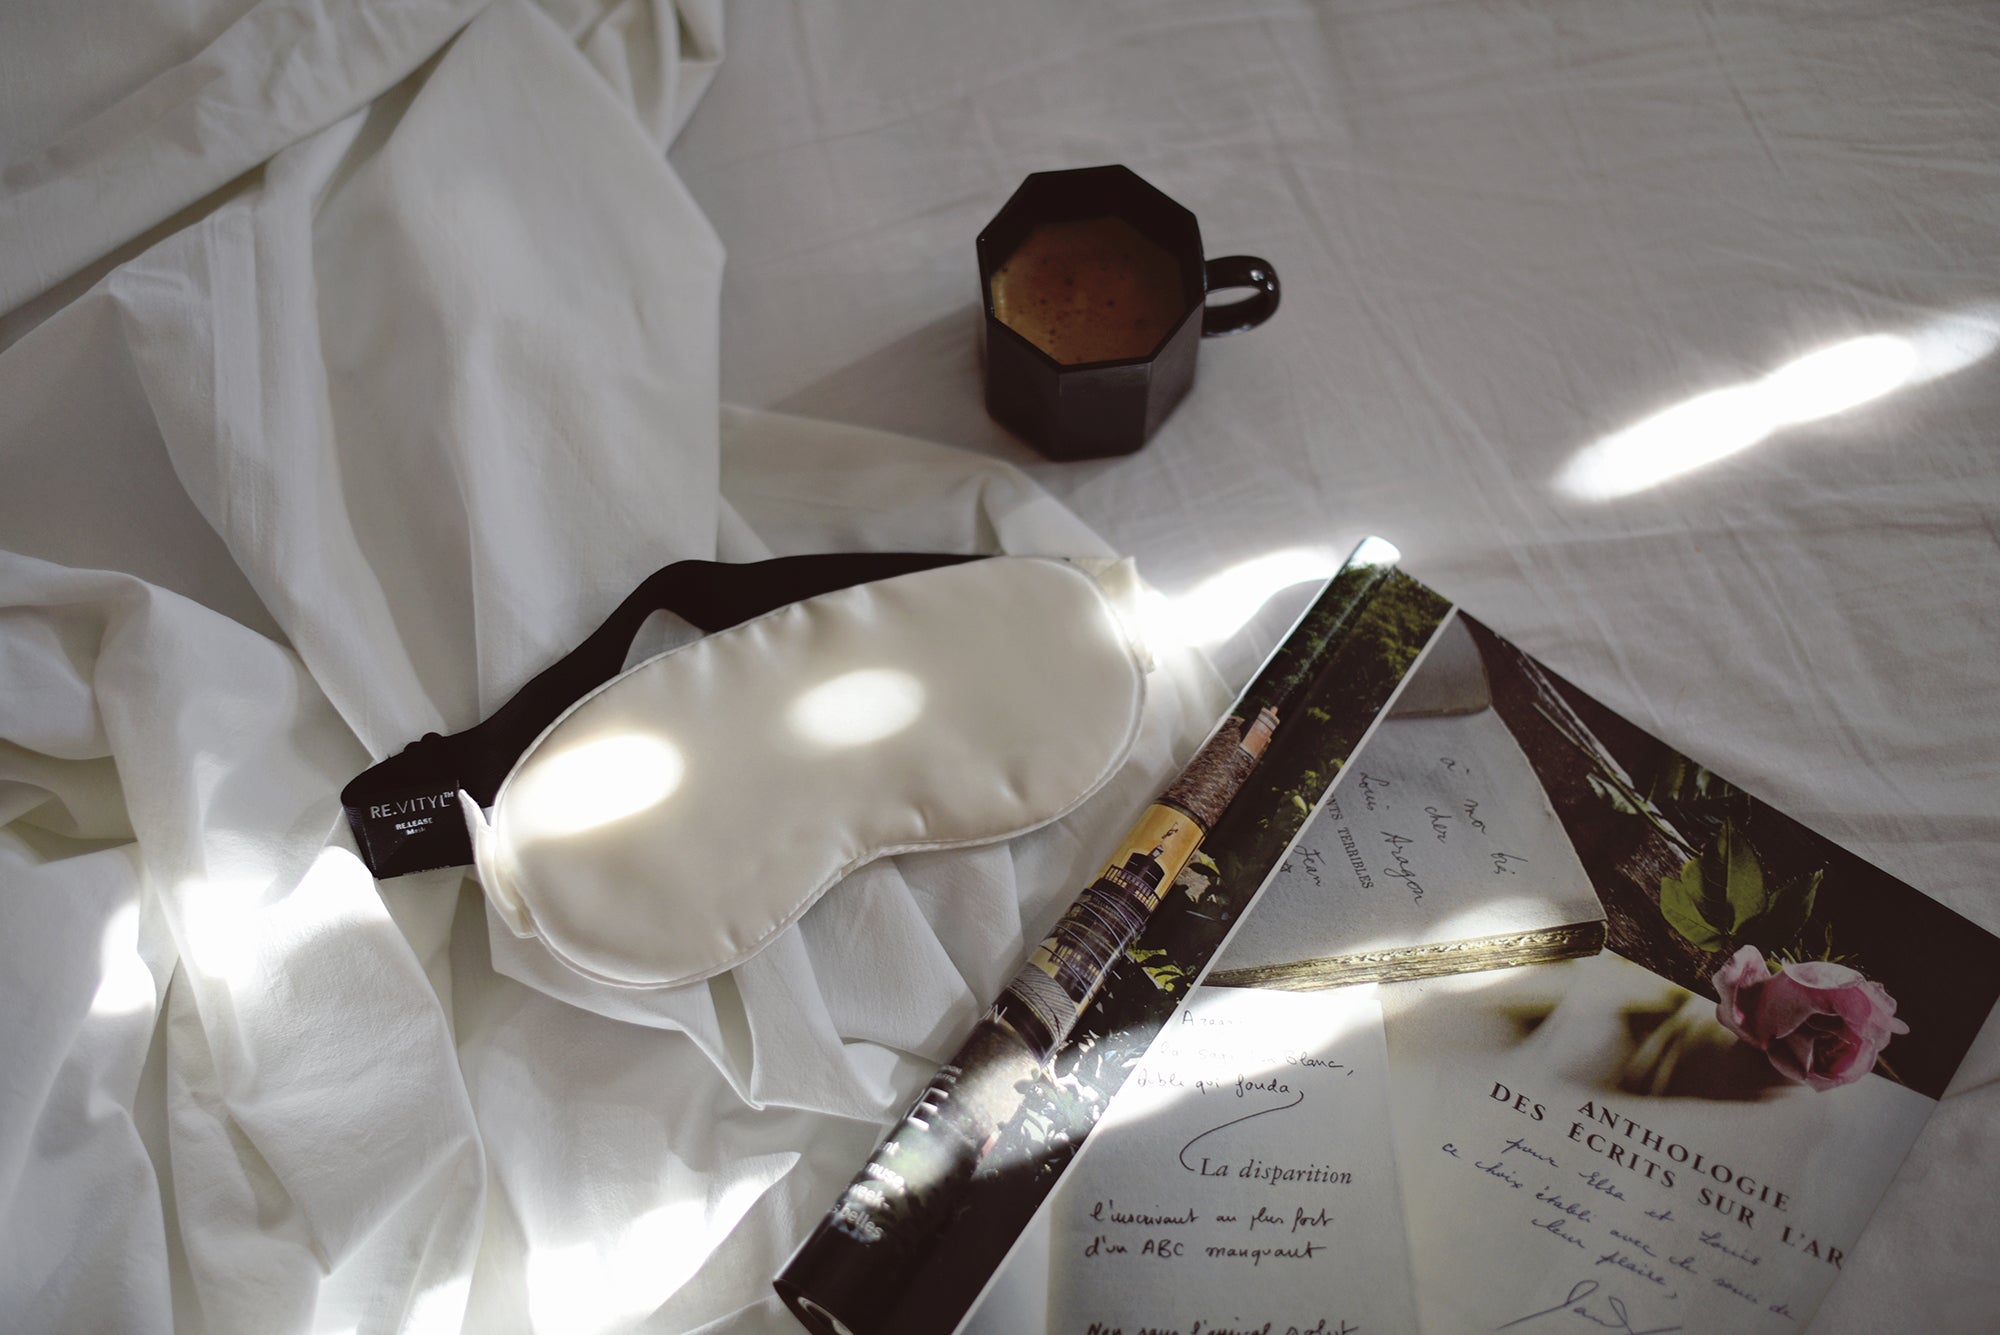 White silk sleep mask with crystals on a bed by a cup of coffee and a magazine